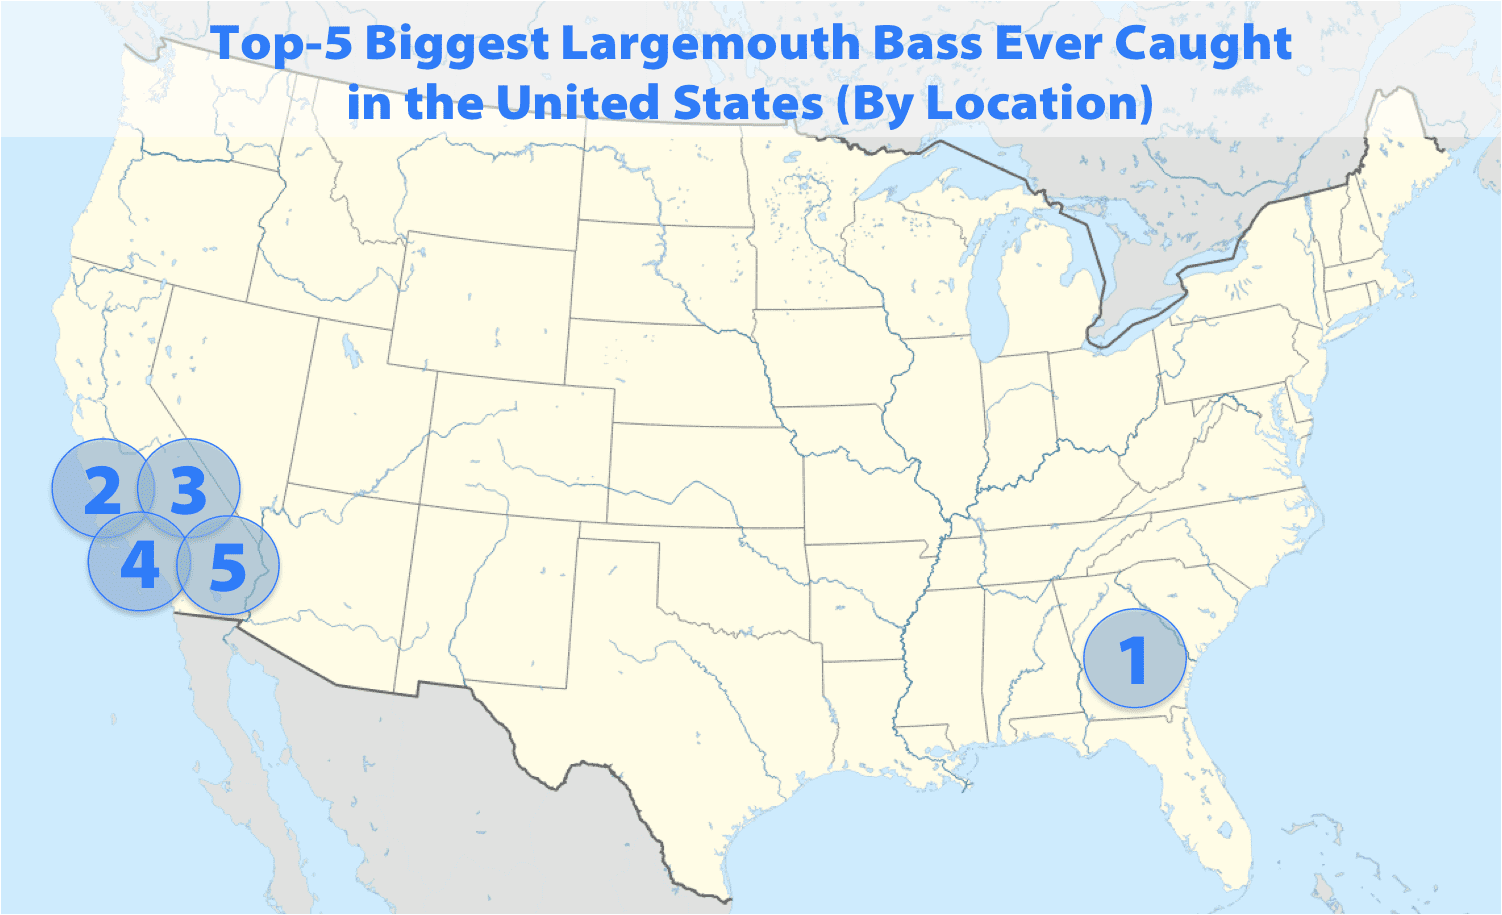 map of the US showing where the 5 biggest largemouth bass were caught